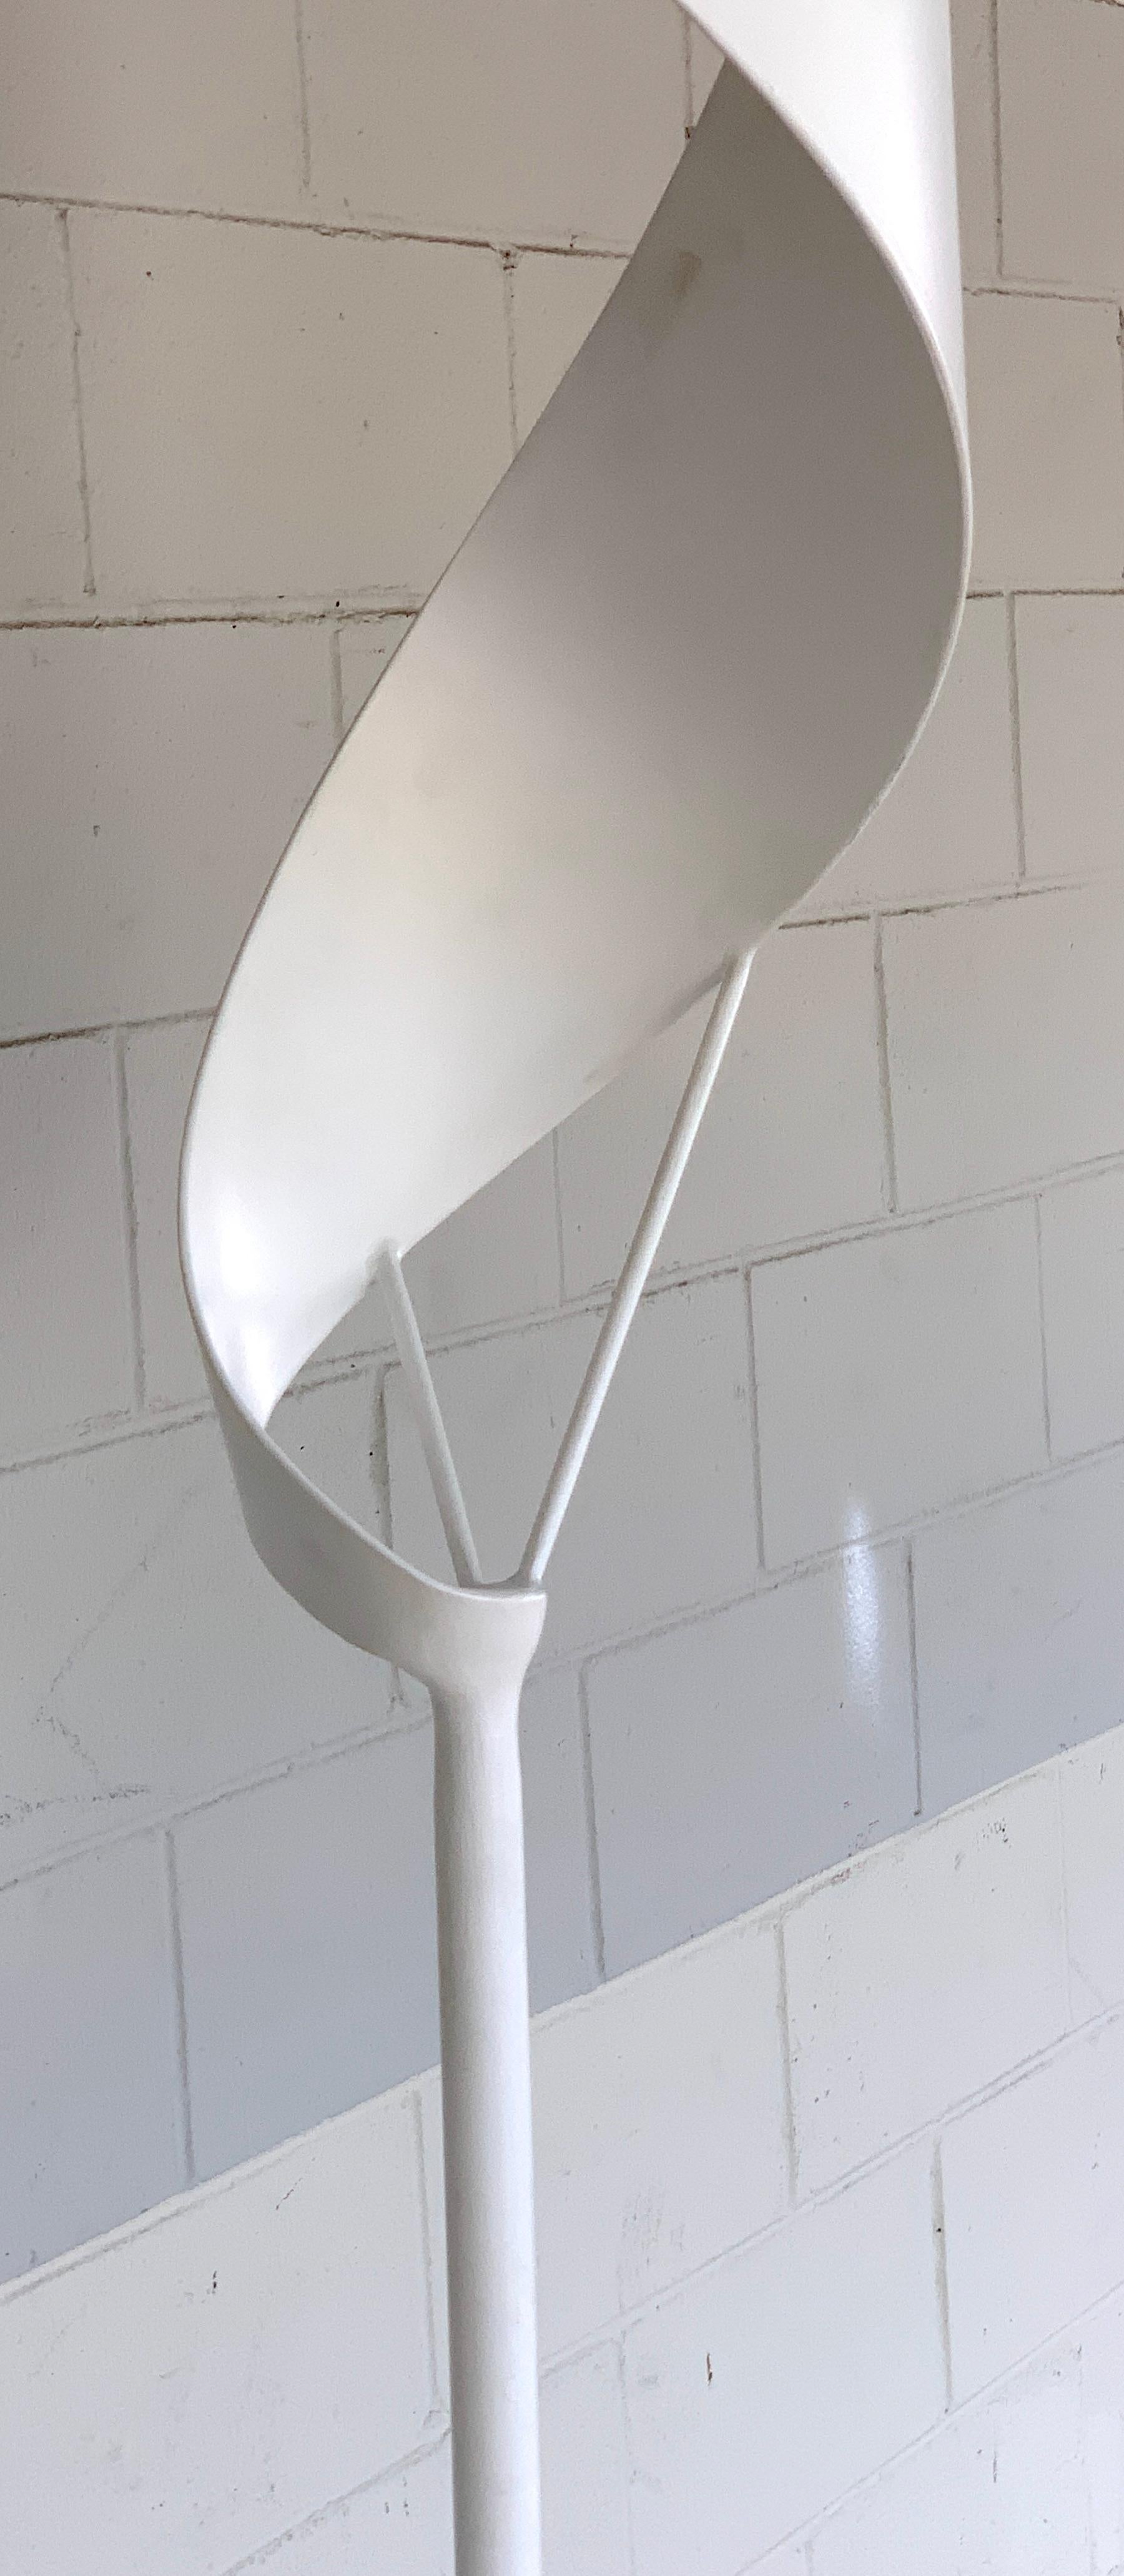 Iron Large Modern White Enameled Forged Steel Kinetic Sculpture '95 M.G. La Mair'